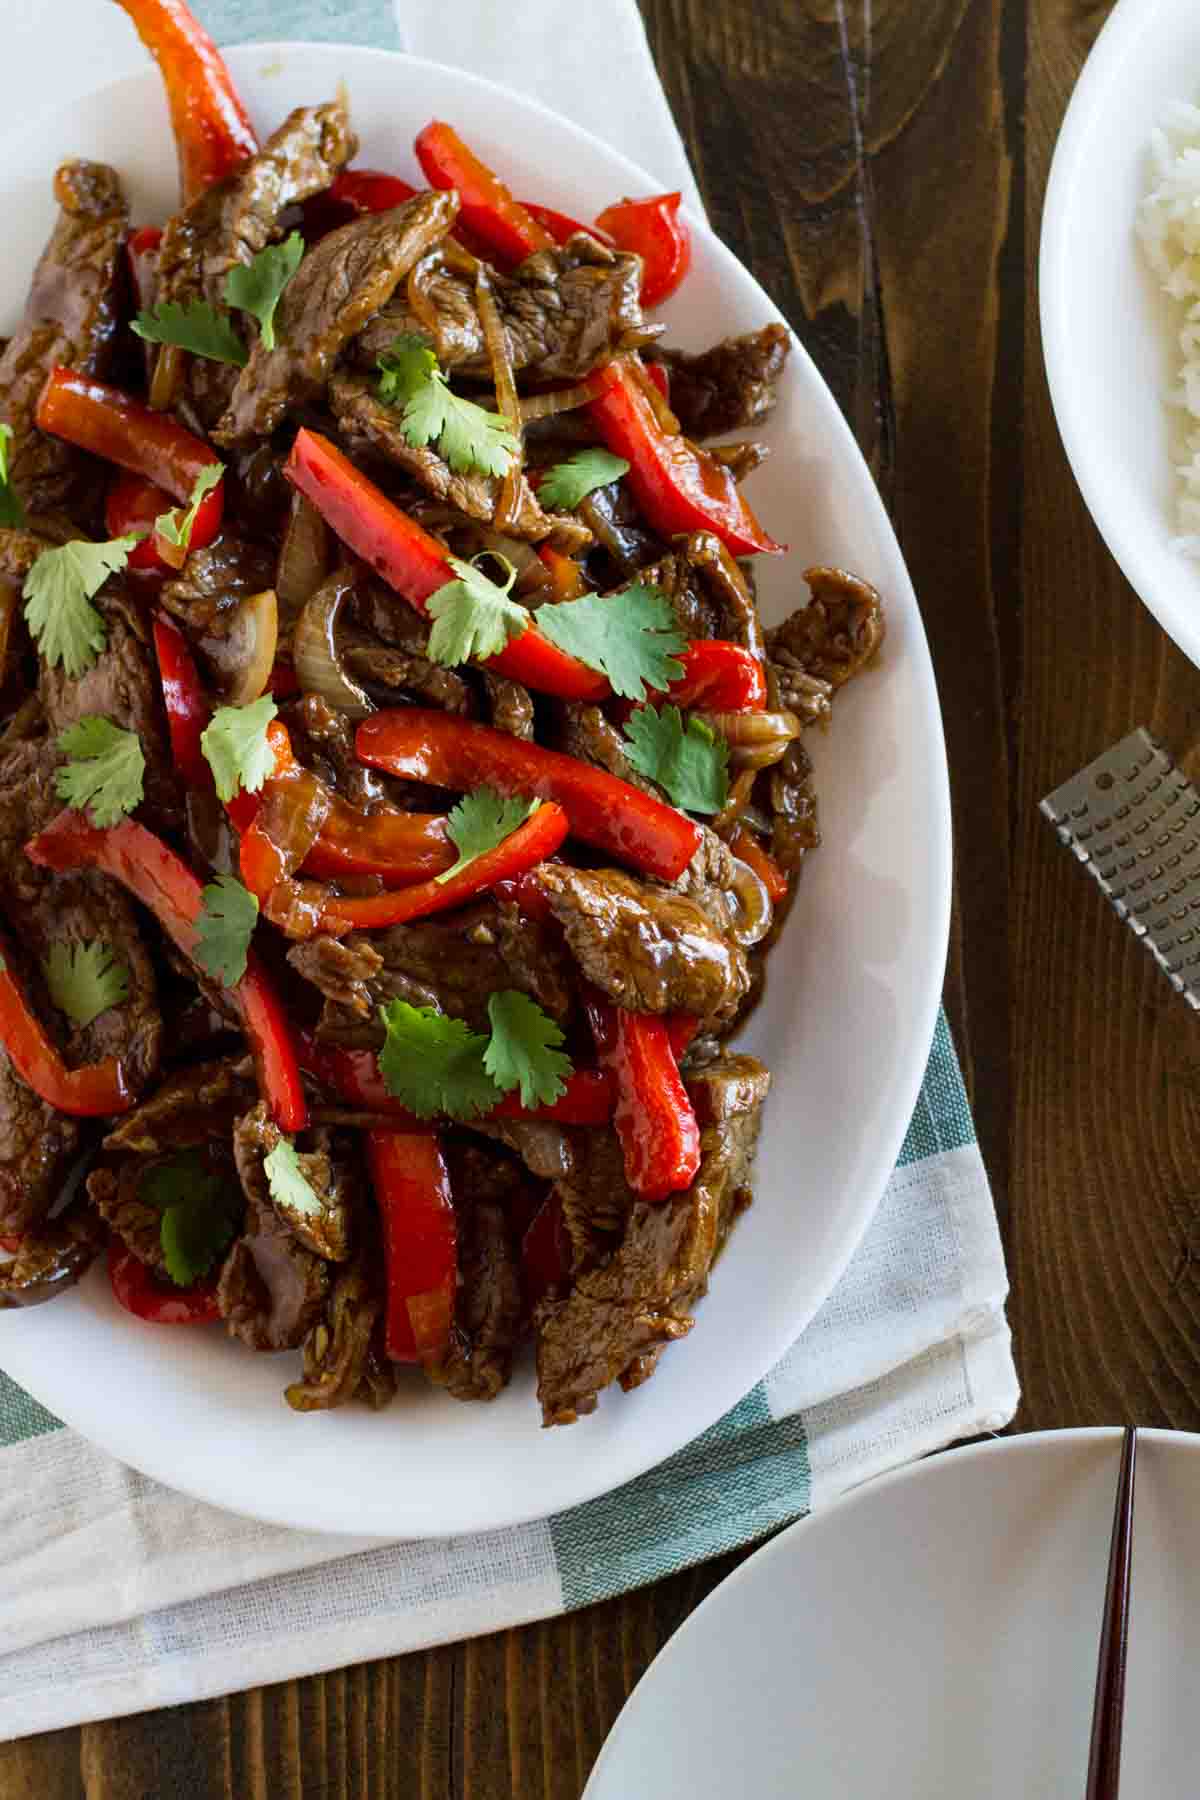 Steak Stir Fry with Red Peppers